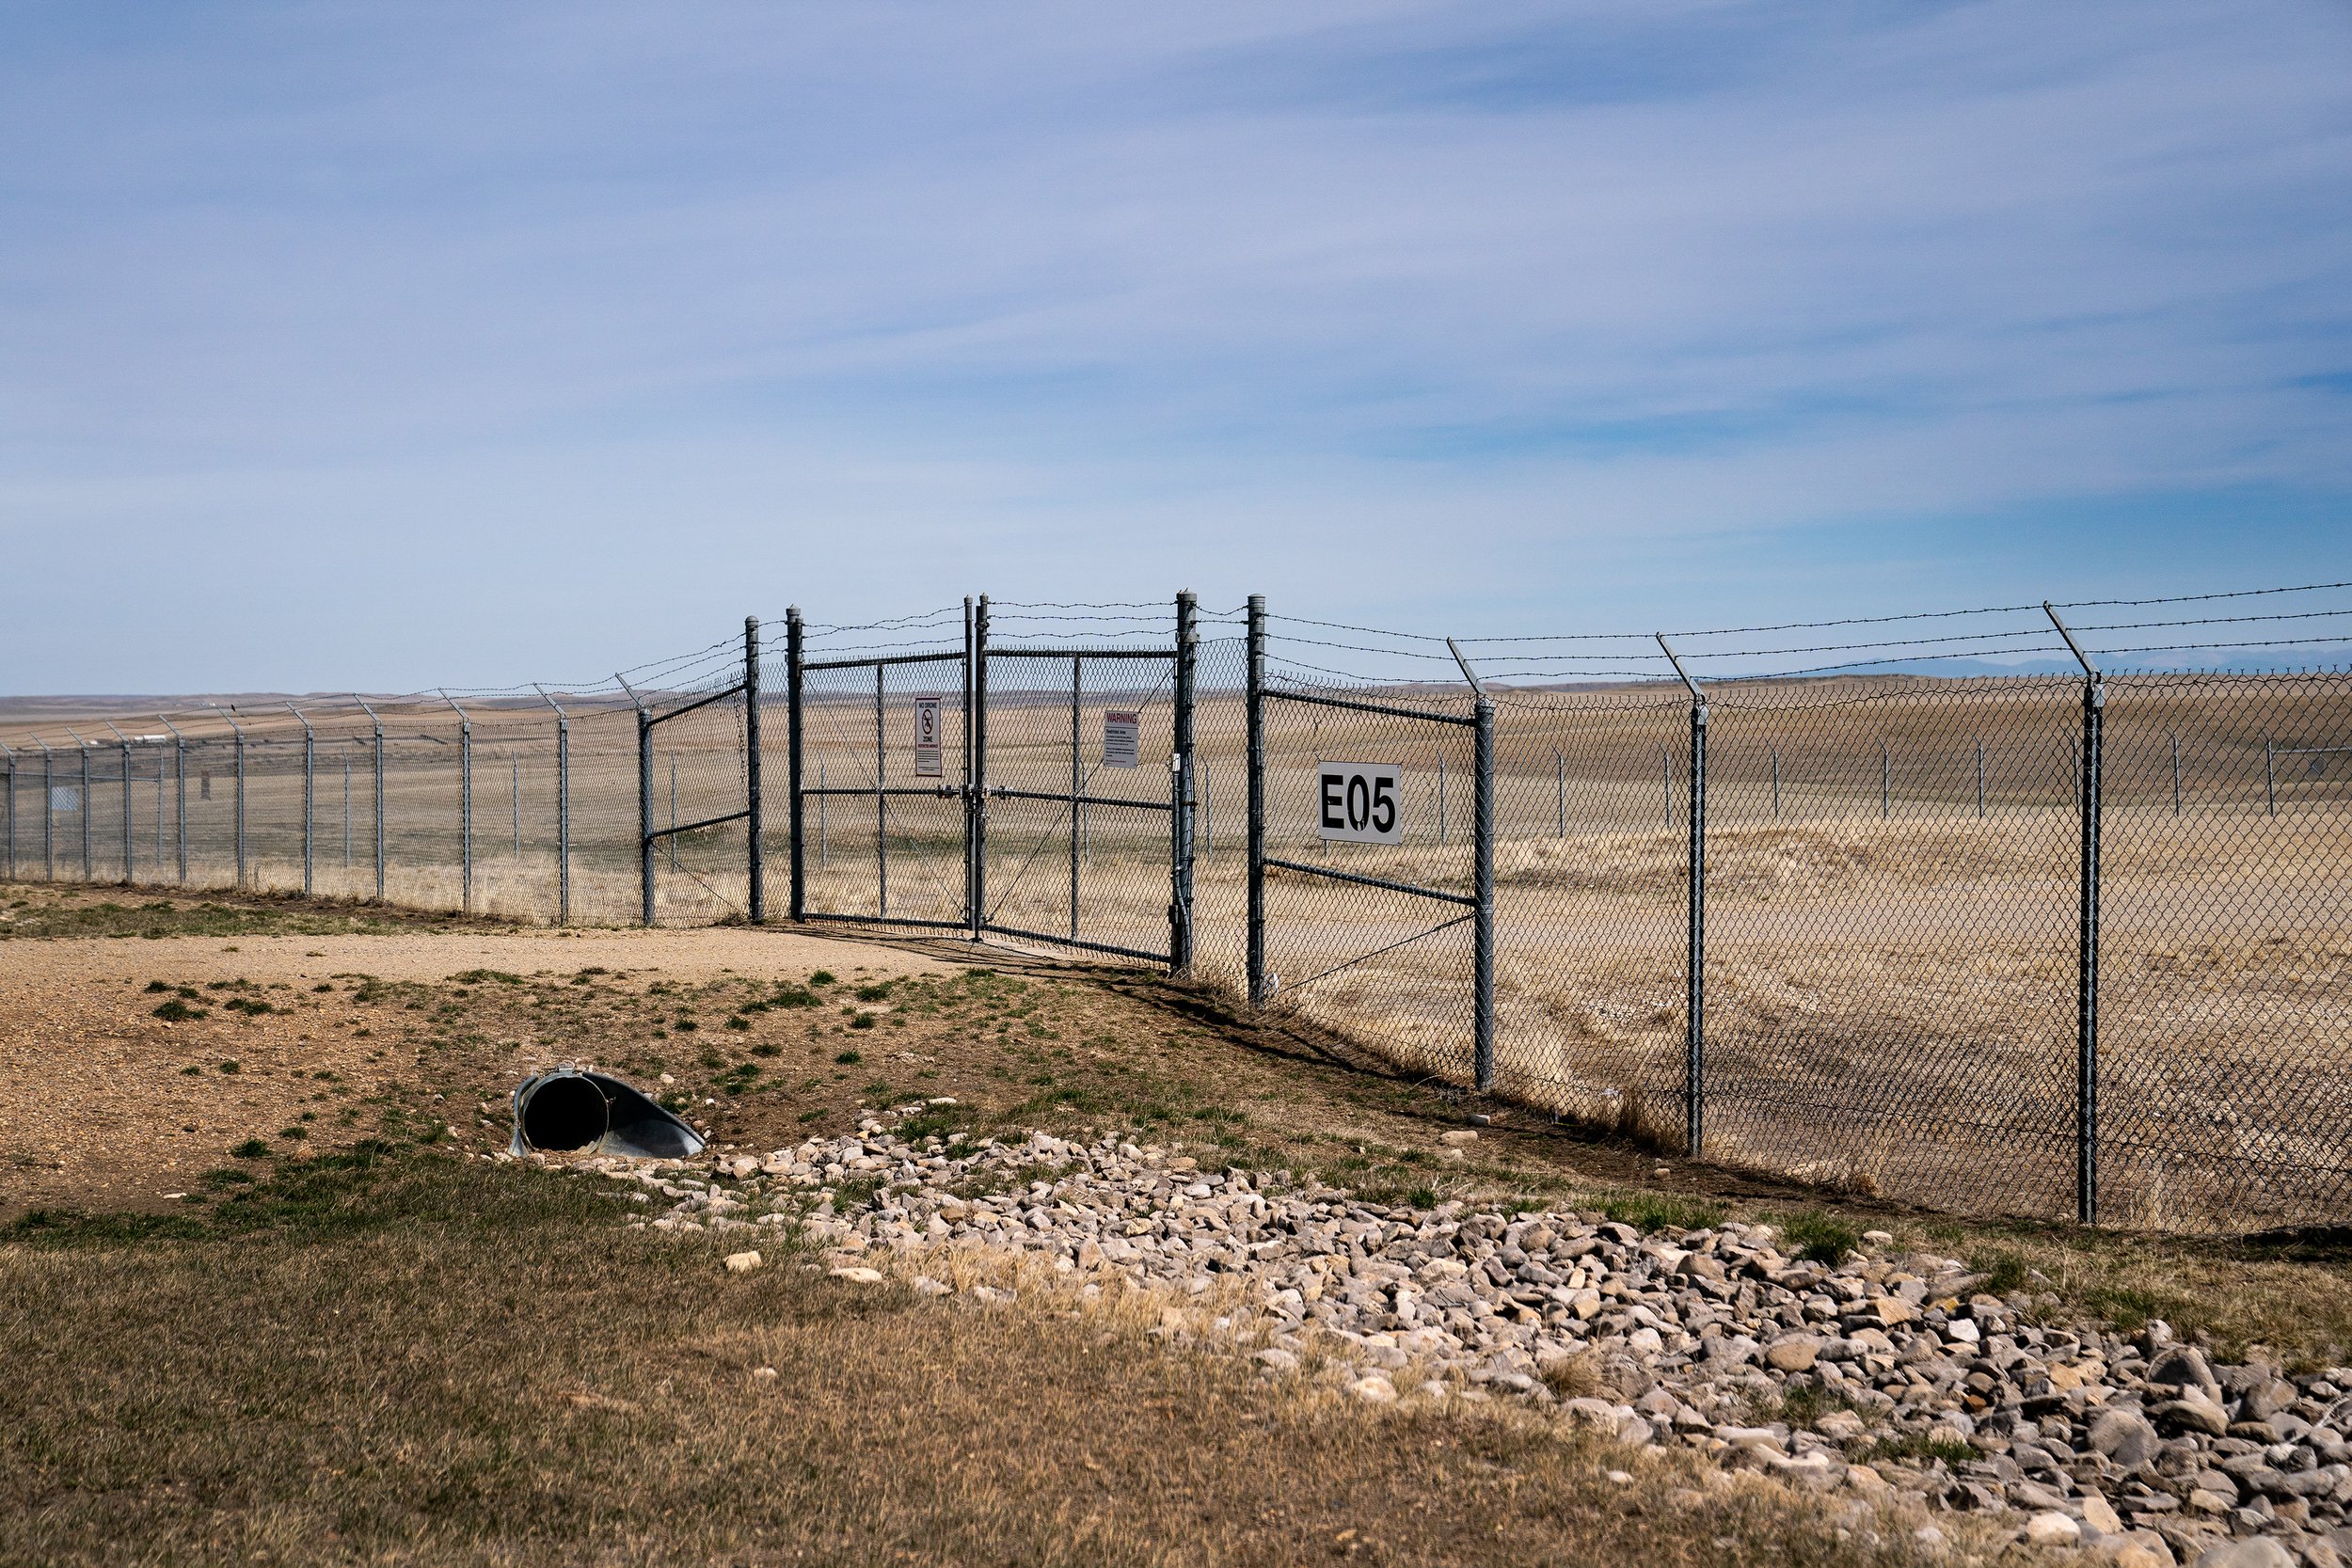  The Air Force bought an acre of the Butcher ranch during the Cold War when it was deploying hundreds of missiles in the Great Plains as part of the U.S. nuclear deterrent against the Soviet Union. 